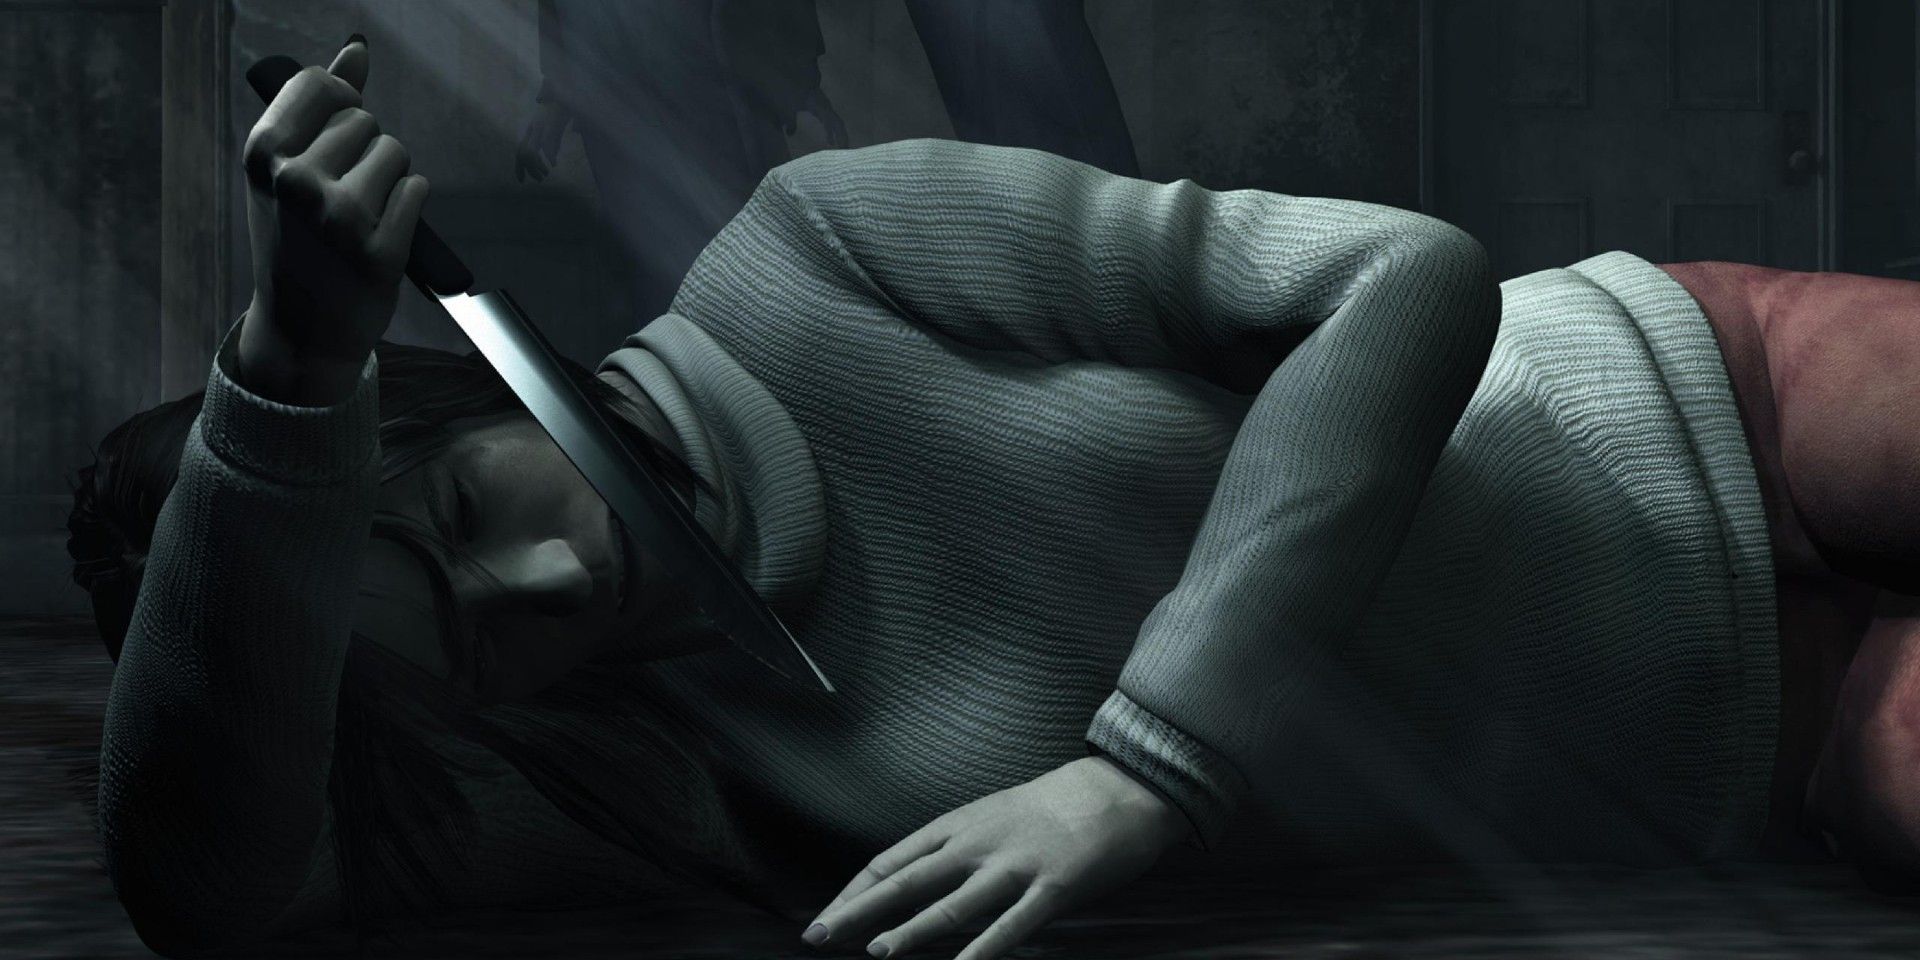 Angela lying on the floor and holding a knife in Silent Hill 2